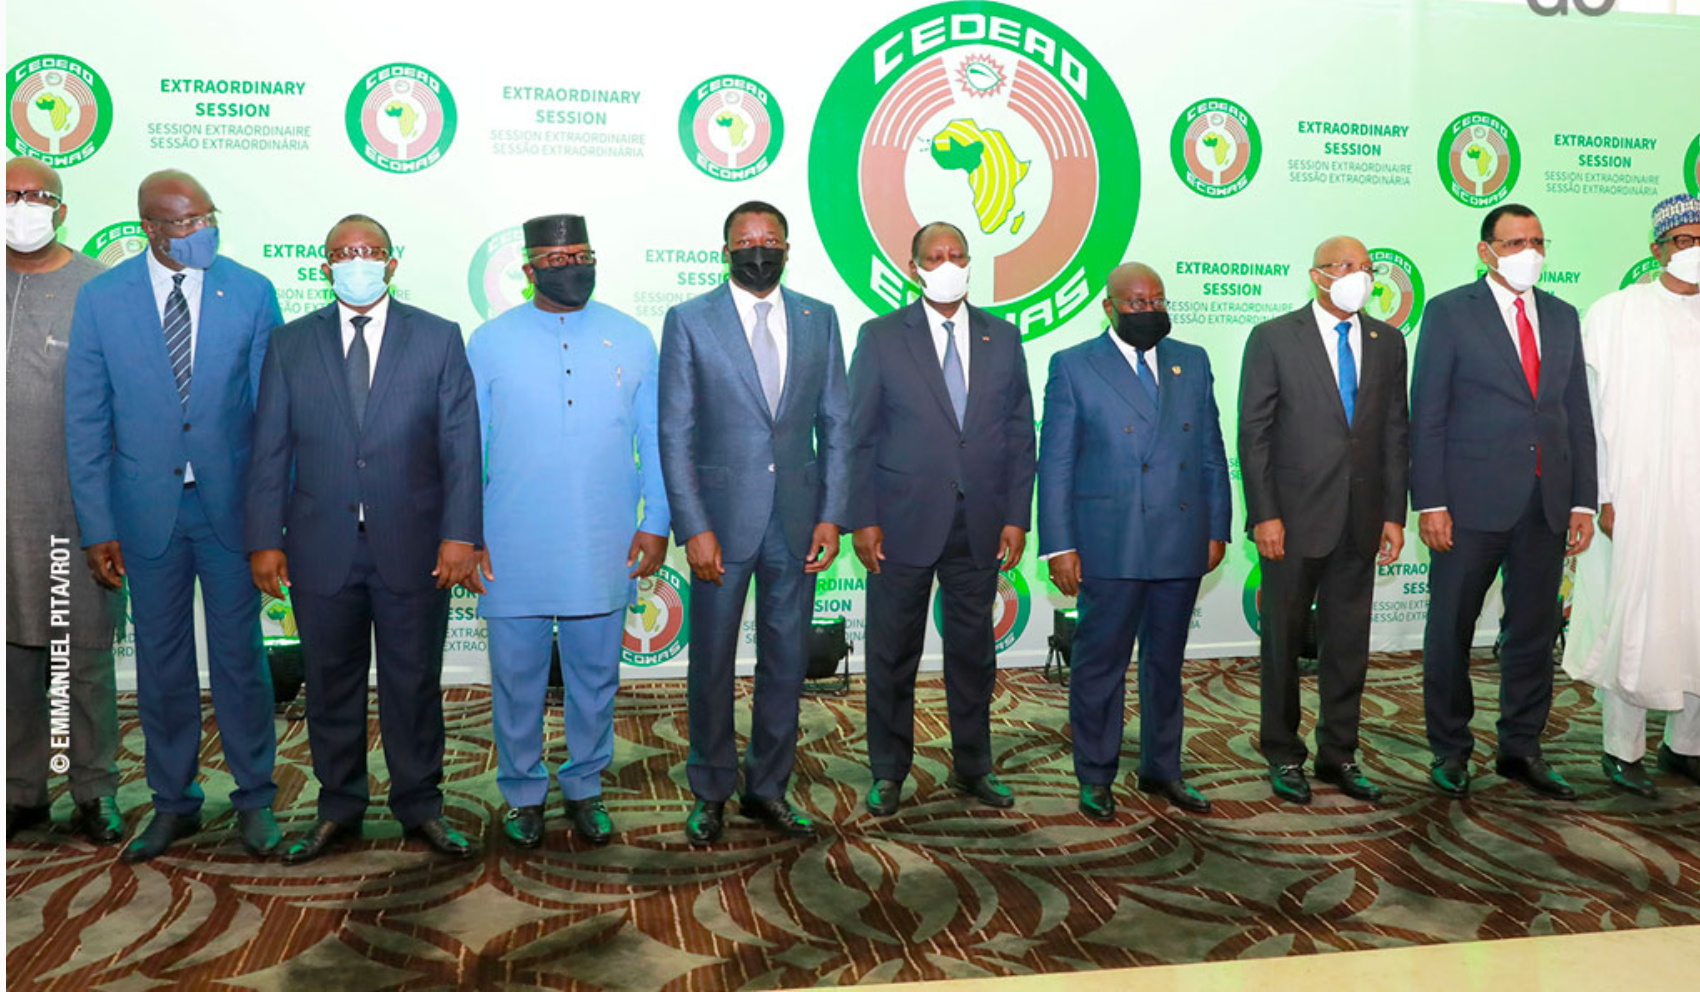 ECOWAS Extraordinary Summit on the situation in Mali